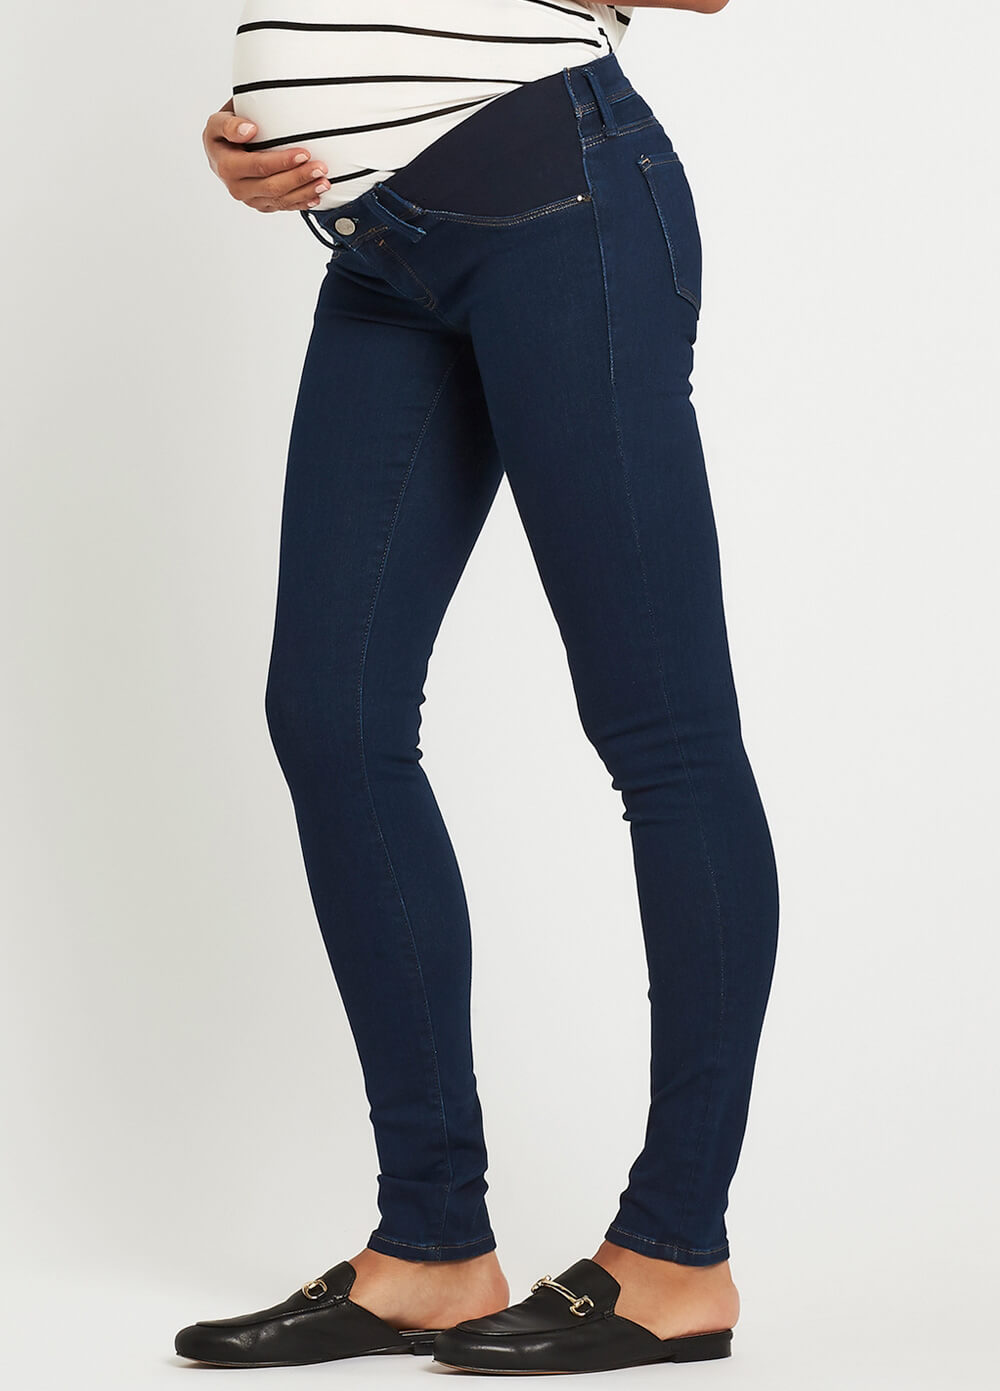 Reina Shaded Rinse Gold Lux Move Skinny Maternity Jeans by Mavi